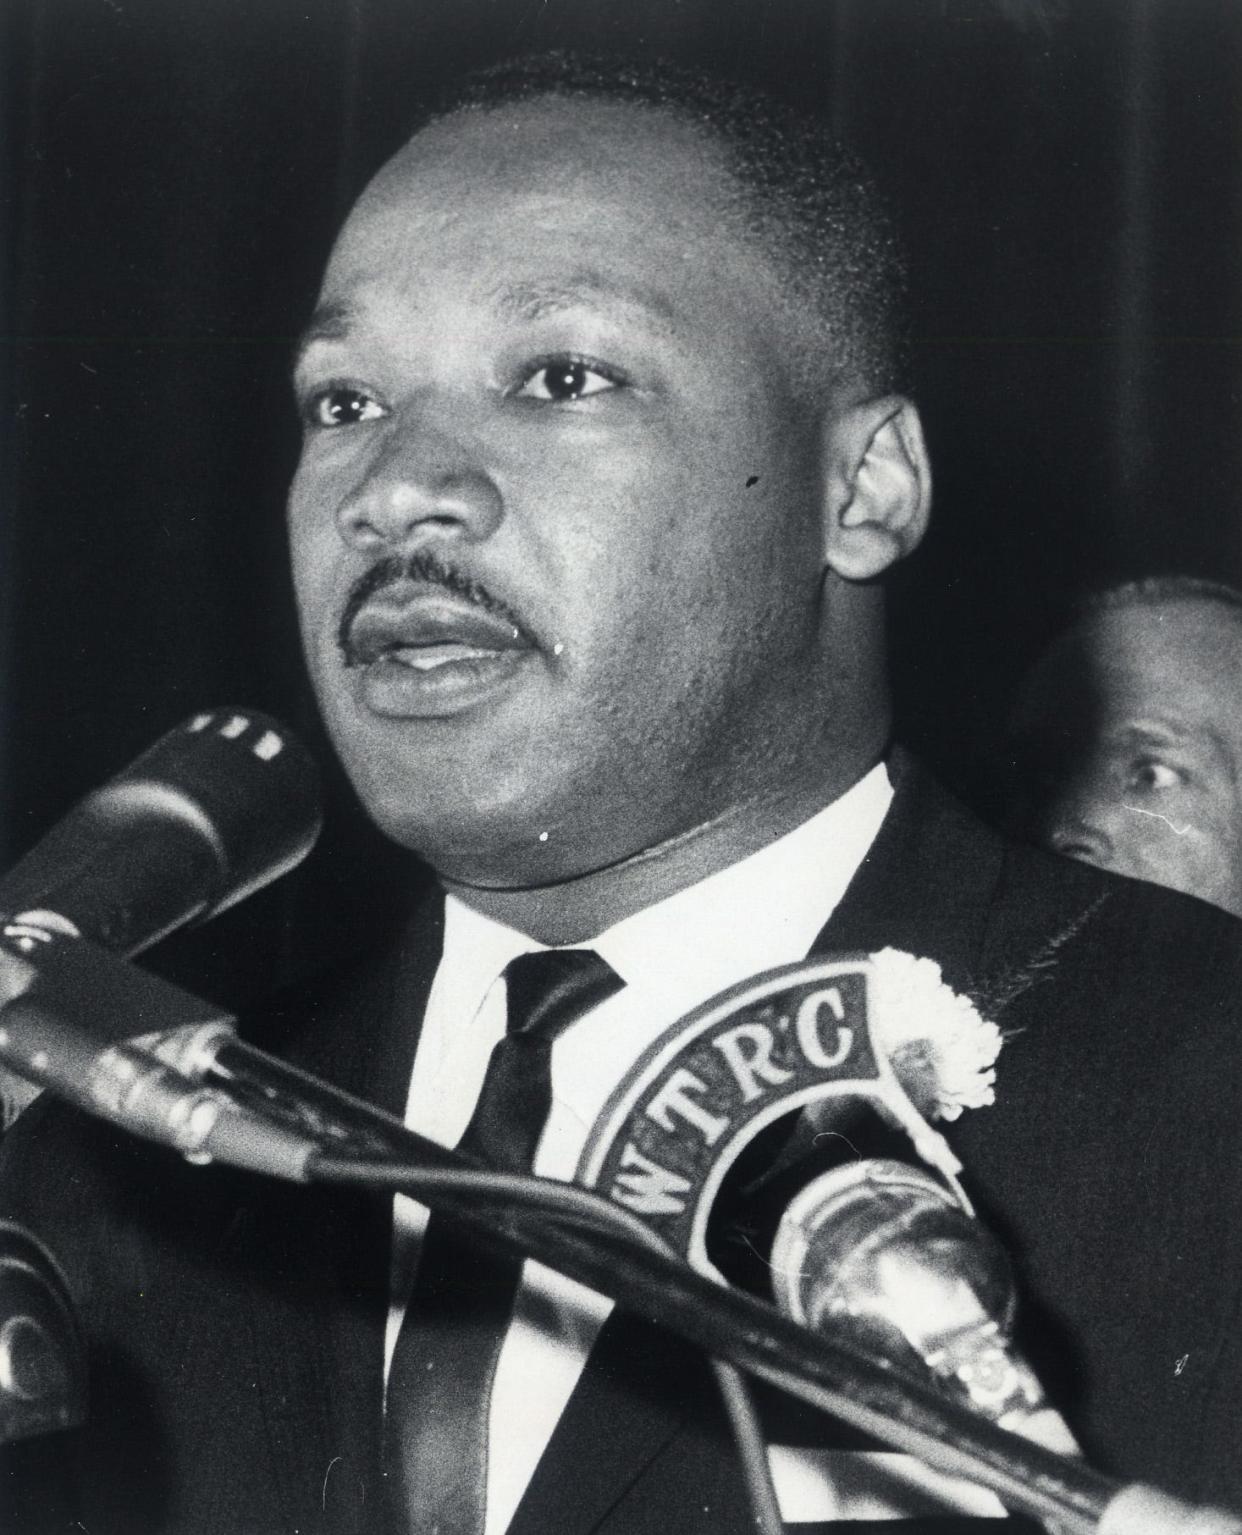 Martin Luther King speaks at Notre Dame in 1963, during his Oct. 18,1963, visit to South Bend. King spoke that evening to more than 3,000 people in Stepan Center at the University of Notre Dame.